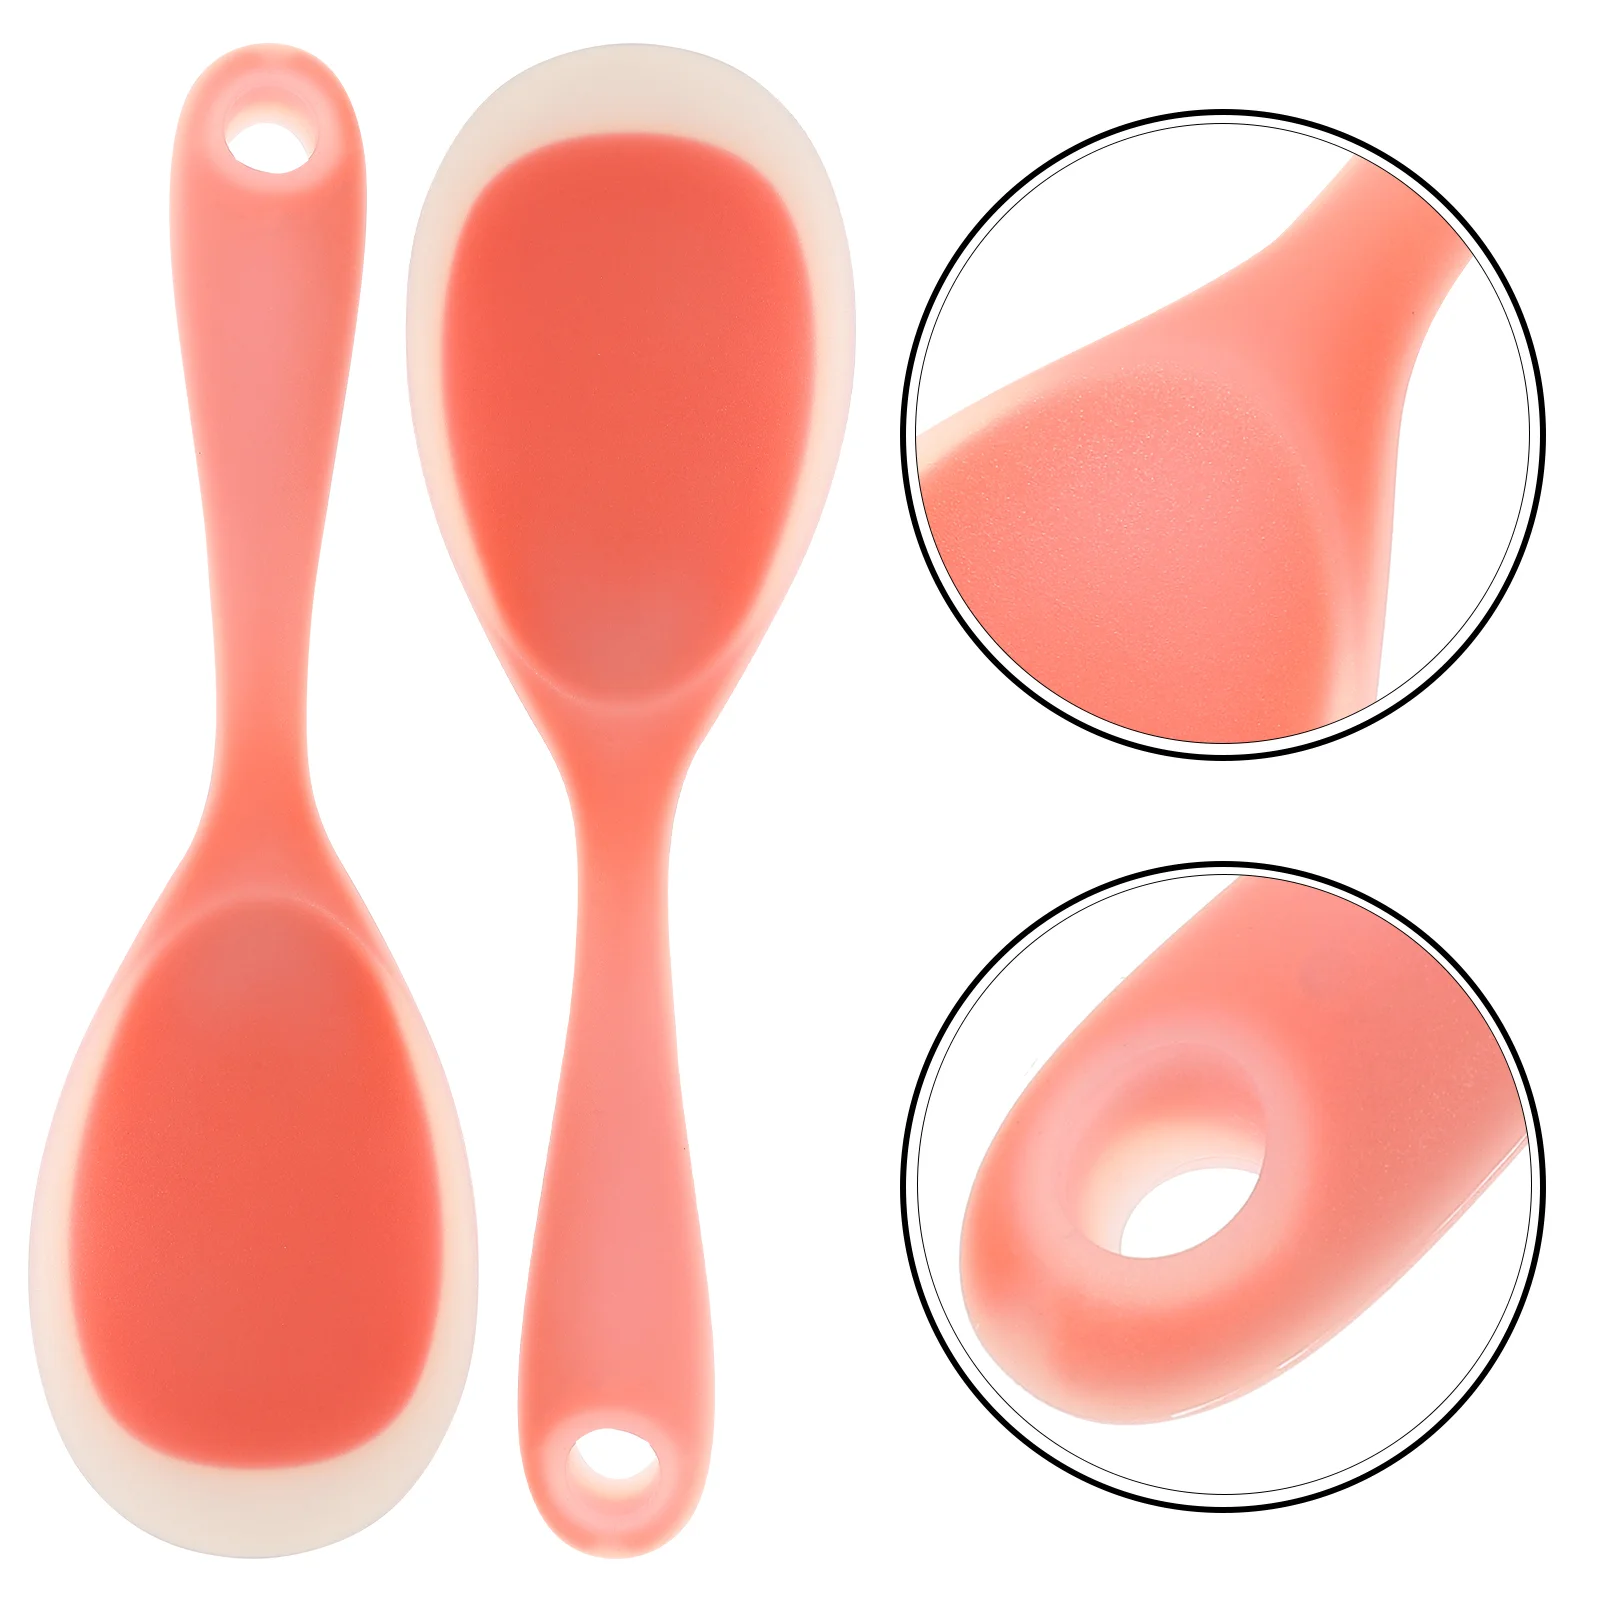 

Rice Spoons Spoon Paddle Stick Non Serving Kitchenpotato Spatula Ladle Silicone Utensil Resistant Heat Mashed Cooking Scooper